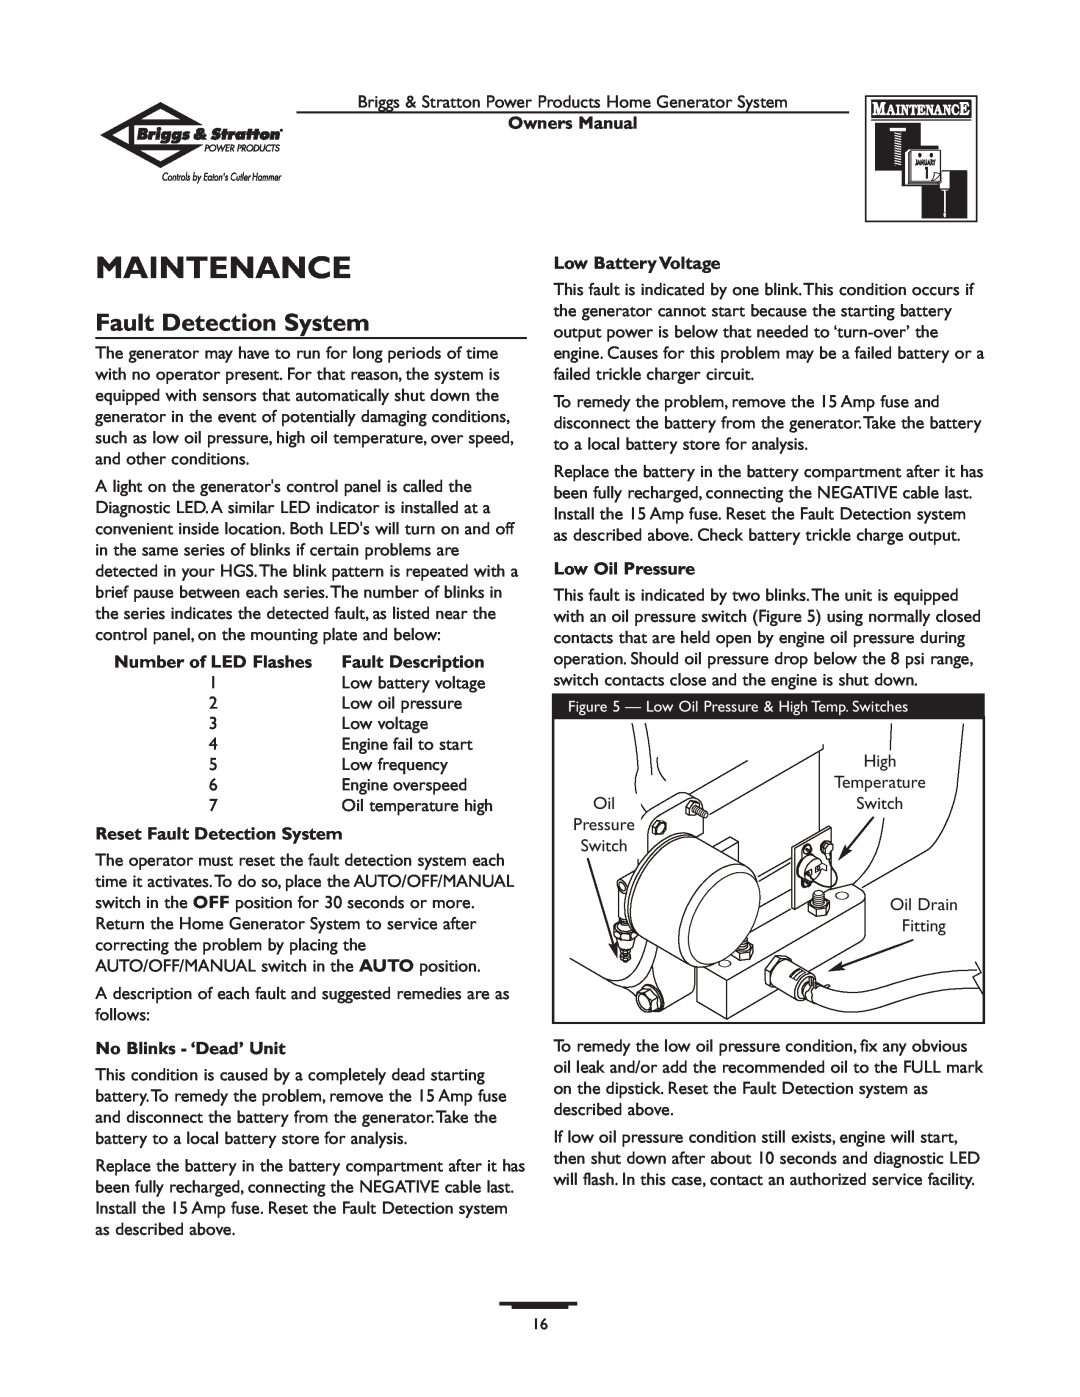 Briggs & Stratton 190839GS Maintenance, Fault Detection System, Owners Manual, Number of LED Flashes, Fault Description 